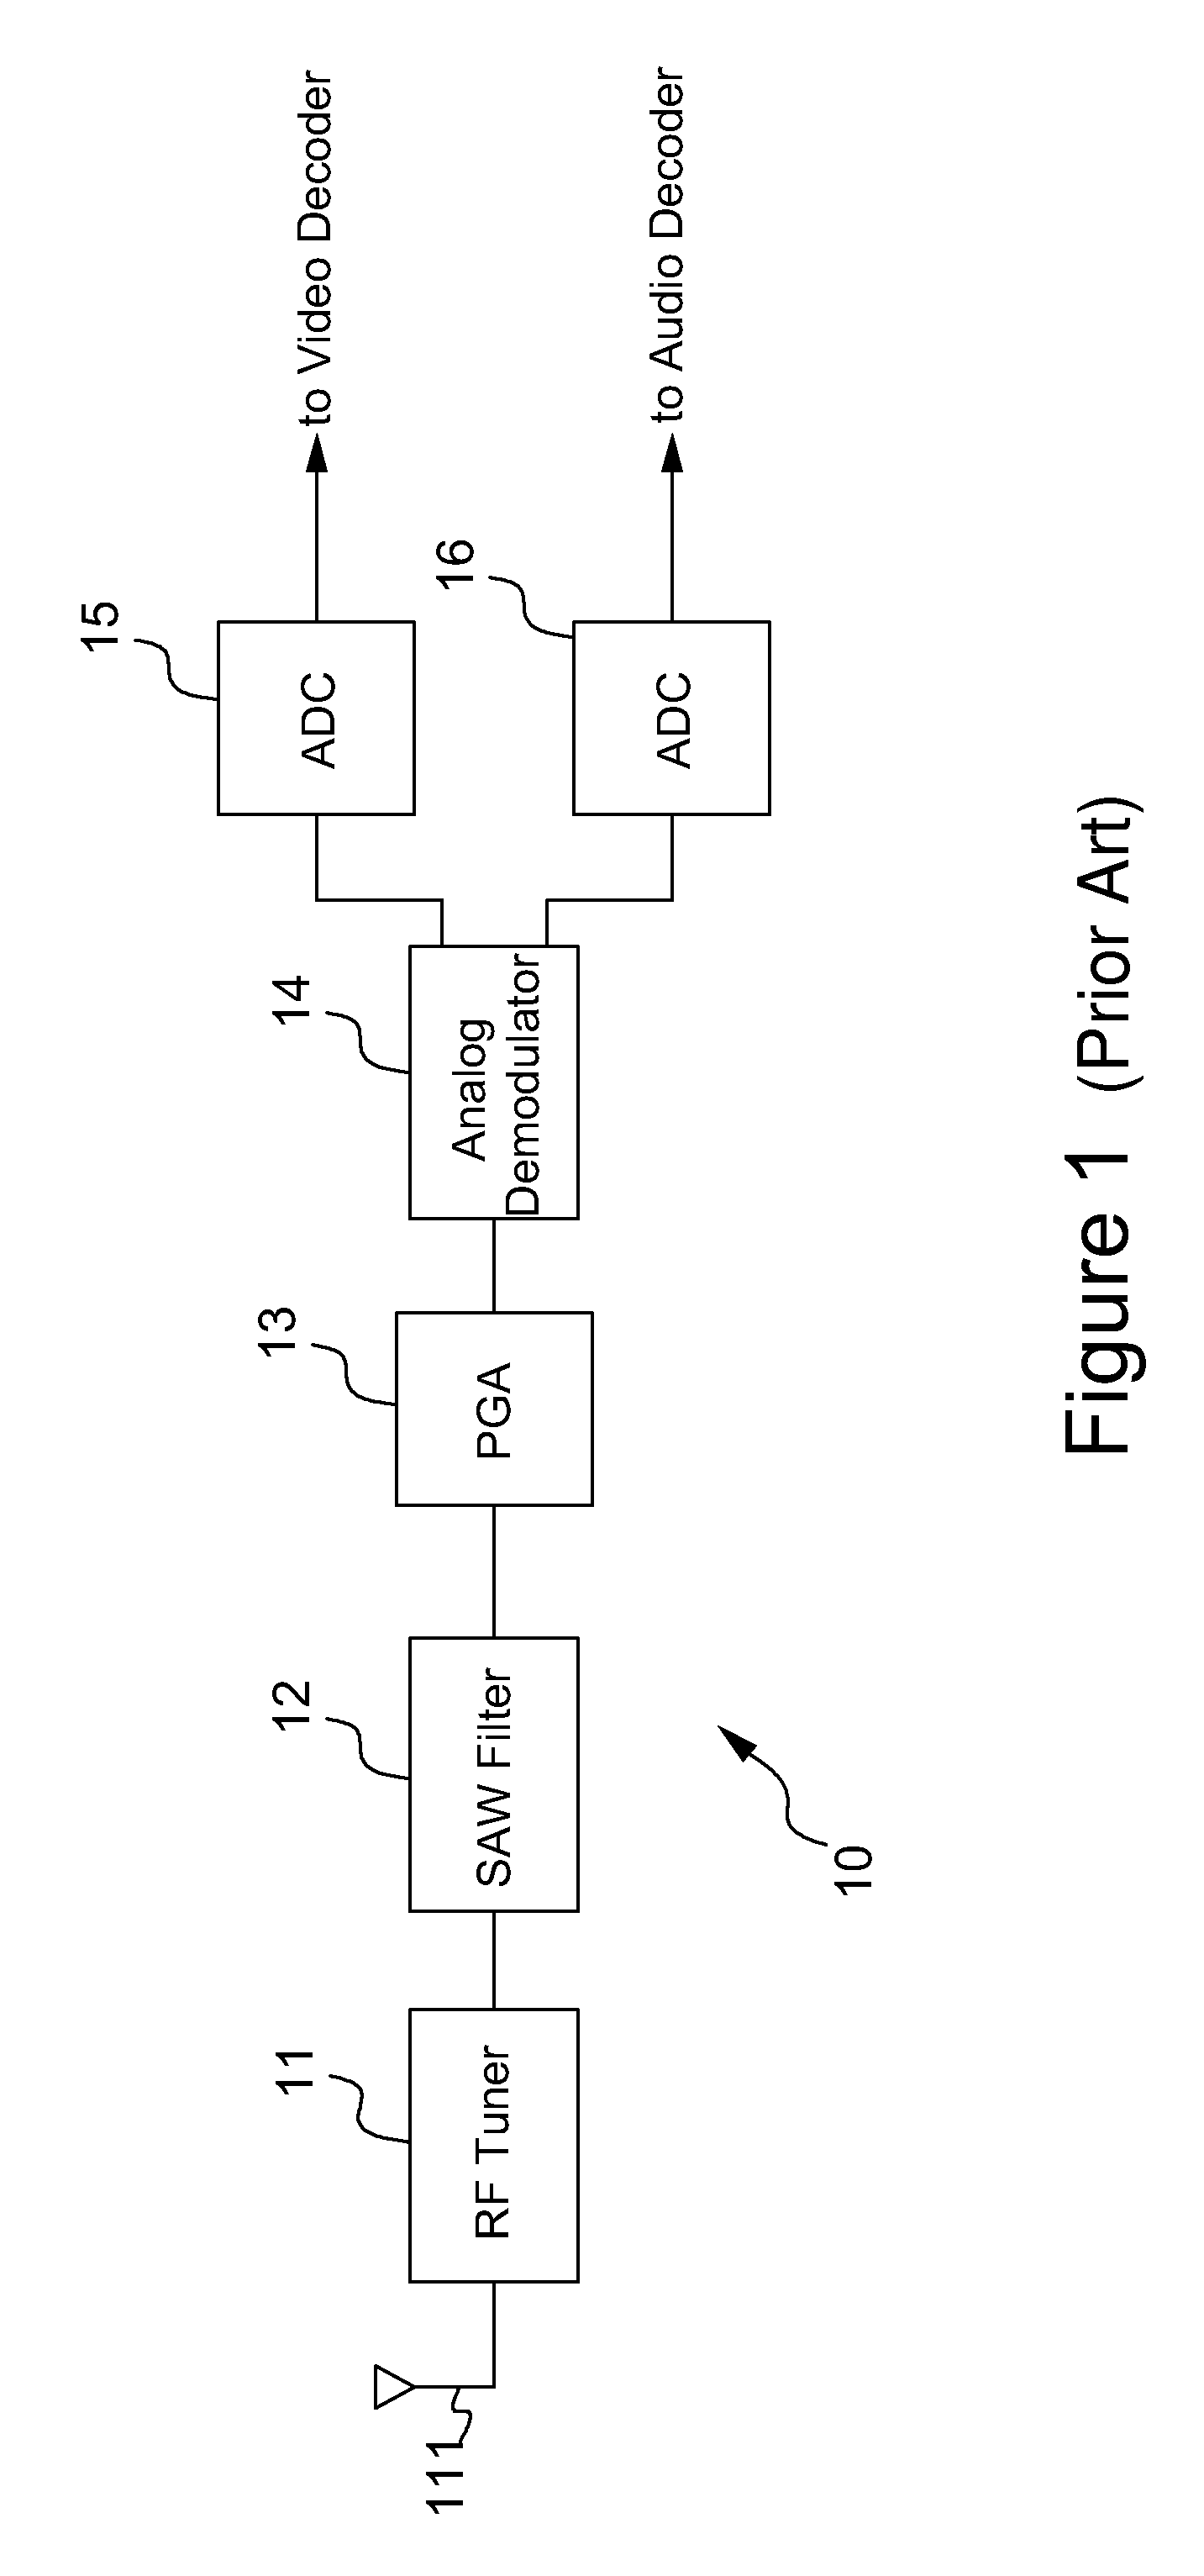 Analog television receiver for processing intermediate frequency TV signal